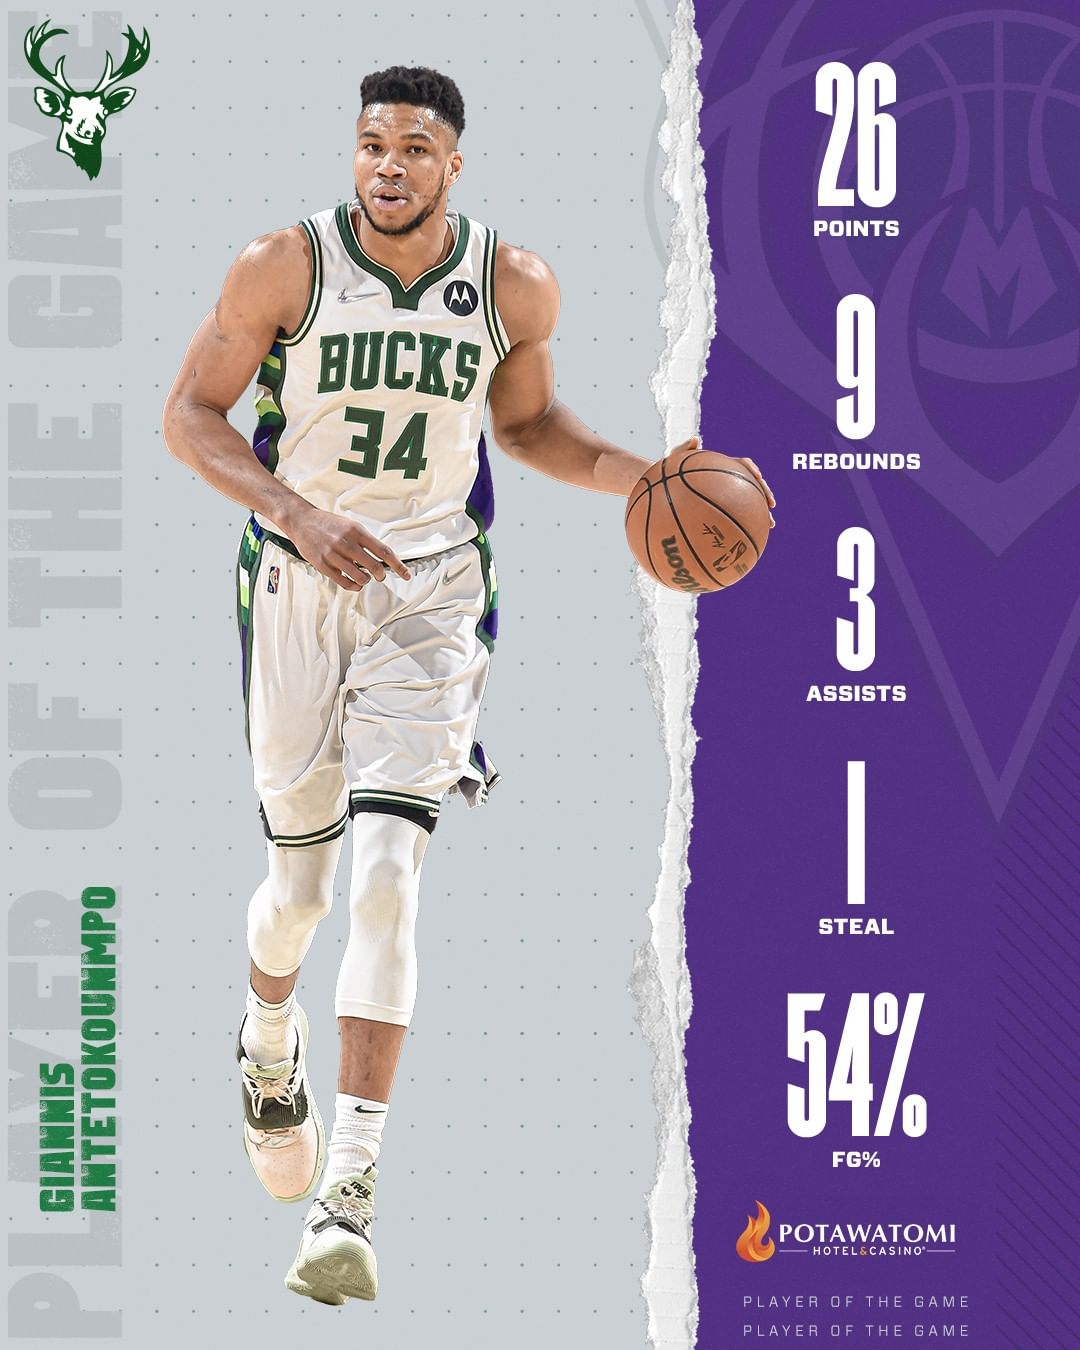 A second-half surge for Giannis tonight....